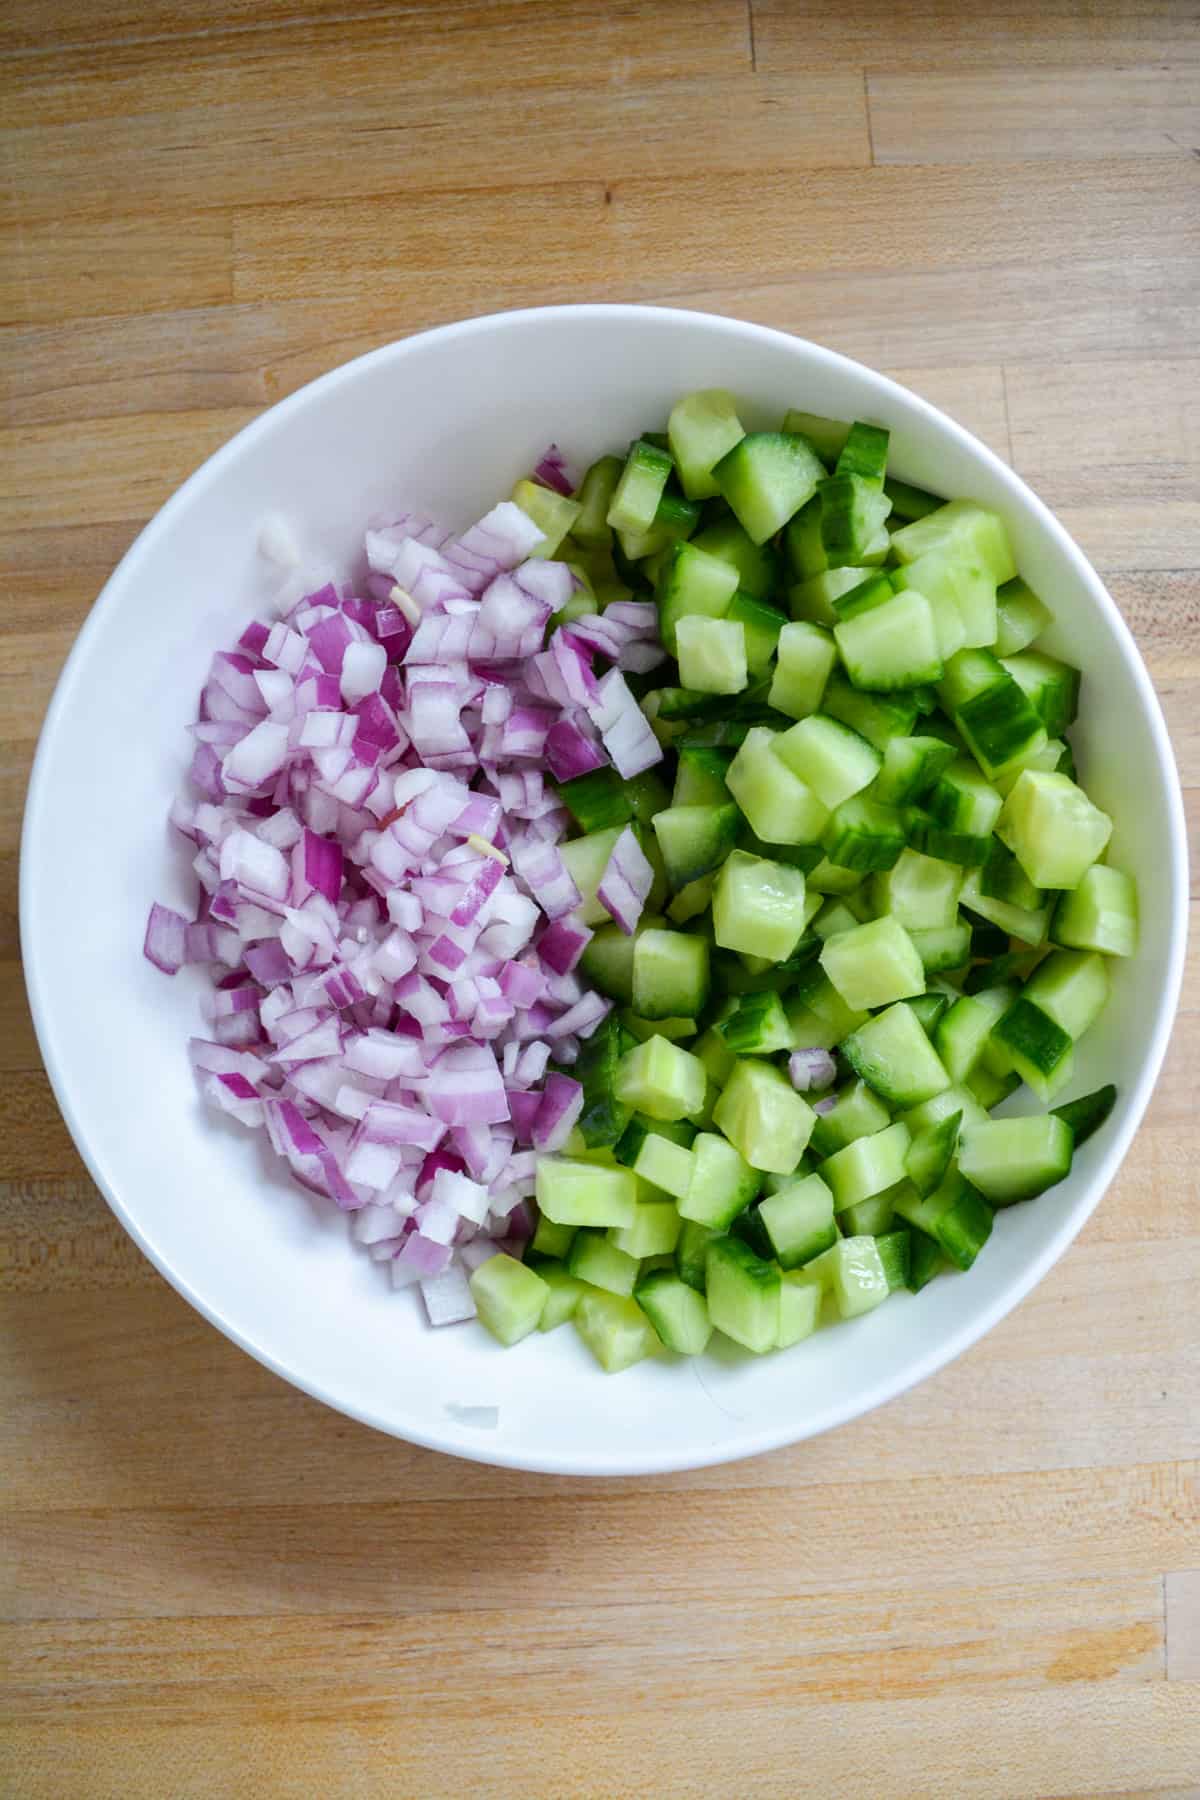 Diced cucumber and red onion in a white bowl on a wooden surface.